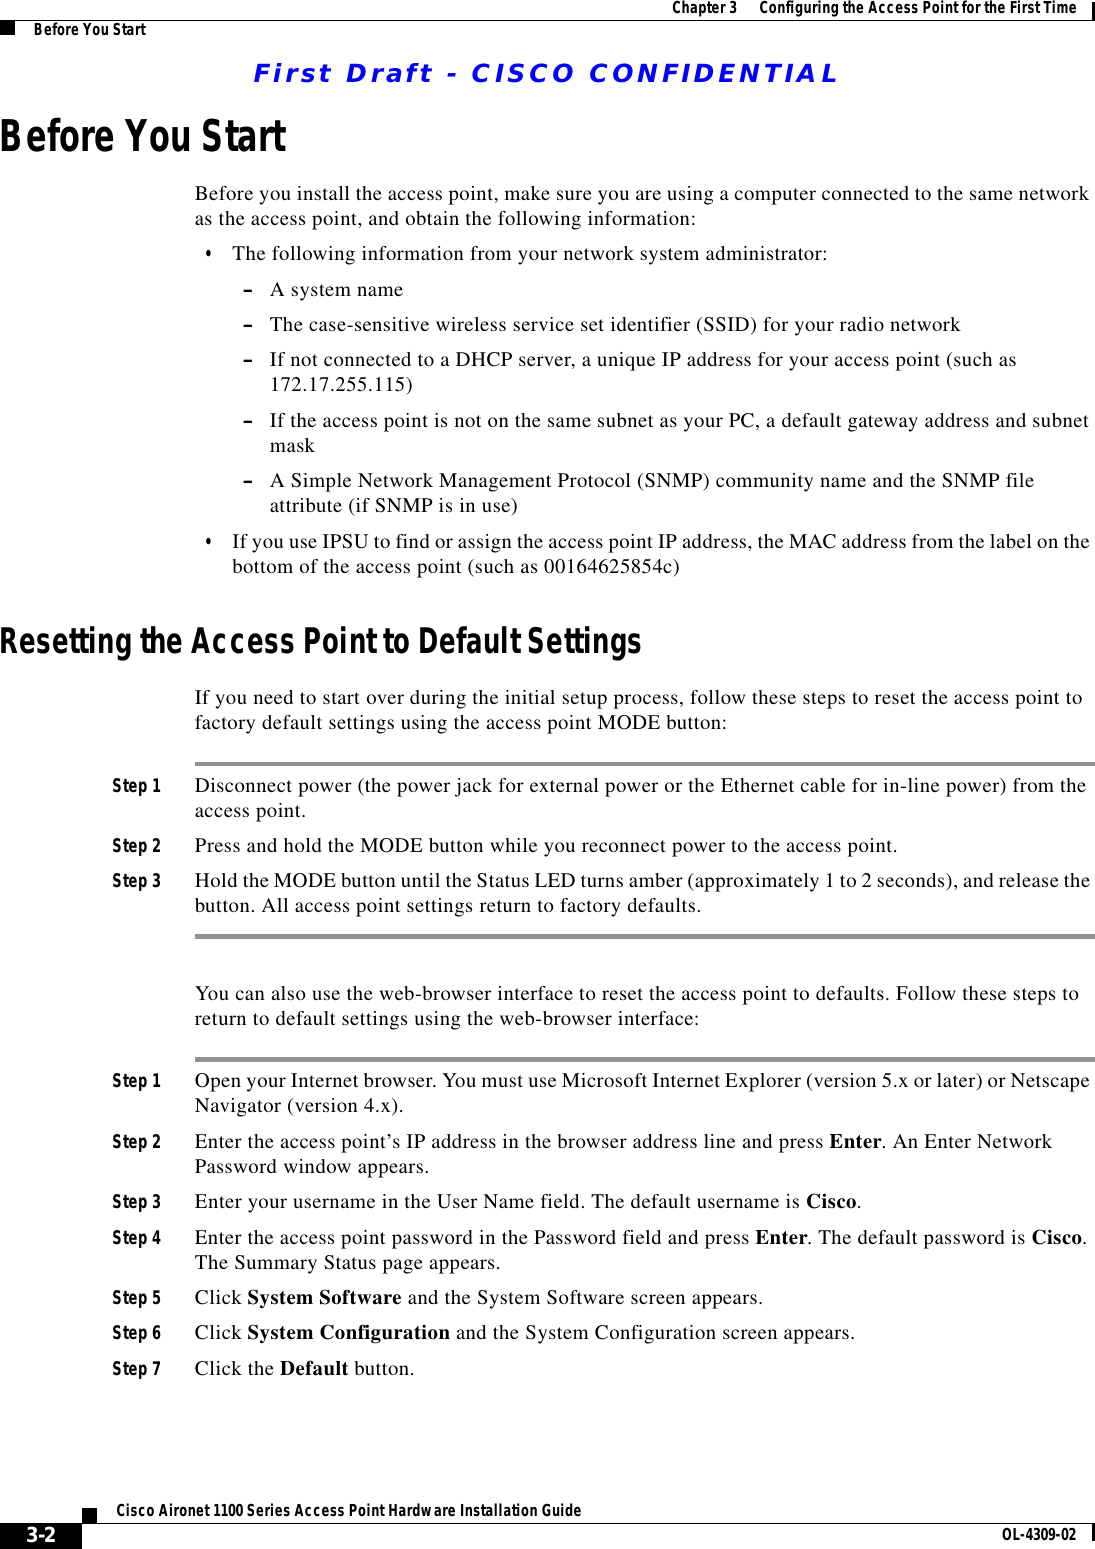 First Draft - CISCO CONFIDENTIAL3-2Cisco Aironet 1100 Series Access Point Hardware Installation Guide OL-4309-02Chapter 3      Configuring the Access Point for the First TimeBefore You StartBefore You StartBefore you install the access point, make sure you are using a computer connected to the same network as the access point, and obtain the following information:•The following information from your network system administrator:–A system name–The case-sensitive wireless service set identifier (SSID) for your radio network–If not connected to a DHCP server, a unique IP address for your access point (such as 172.17.255.115)–If the access point is not on the same subnet as your PC, a default gateway address and subnet mask–A Simple Network Management Protocol (SNMP) community name and the SNMP file attribute (if SNMP is in use)•If you use IPSU to find or assign the access point IP address, the MAC address from the label on the bottom of the access point (such as 00164625854c)Resetting the Access Point to Default SettingsIf you need to start over during the initial setup process, follow these steps to reset the access point to factory default settings using the access point MODE button:Step 1 Disconnect power (the power jack for external power or the Ethernet cable for in-line power) from the access point.Step 2 Press and hold the MODE button while you reconnect power to the access point.Step 3 Hold the MODE button until the Status LED turns amber (approximately 1 to 2 seconds), and release the button. All access point settings return to factory defaults.You can also use the web-browser interface to reset the access point to defaults. Follow these steps to return to default settings using the web-browser interface:Step 1 Open your Internet browser. You must use Microsoft Internet Explorer (version 5.x or later) or Netscape Navigator (version 4.x).Step 2 Enter the access point’s IP address in the browser address line and press Enter. An Enter Network Password window appears.Step 3 Enter your username in the User Name field. The default username is Cisco.Step 4 Enter the access point password in the Password field and press Enter. The default password is Cisco. The Summary Status page appears.Step 5 Click System Software and the System Software screen appears.Step 6 Click System Configuration and the System Configuration screen appears.Step 7 Click the Default button.